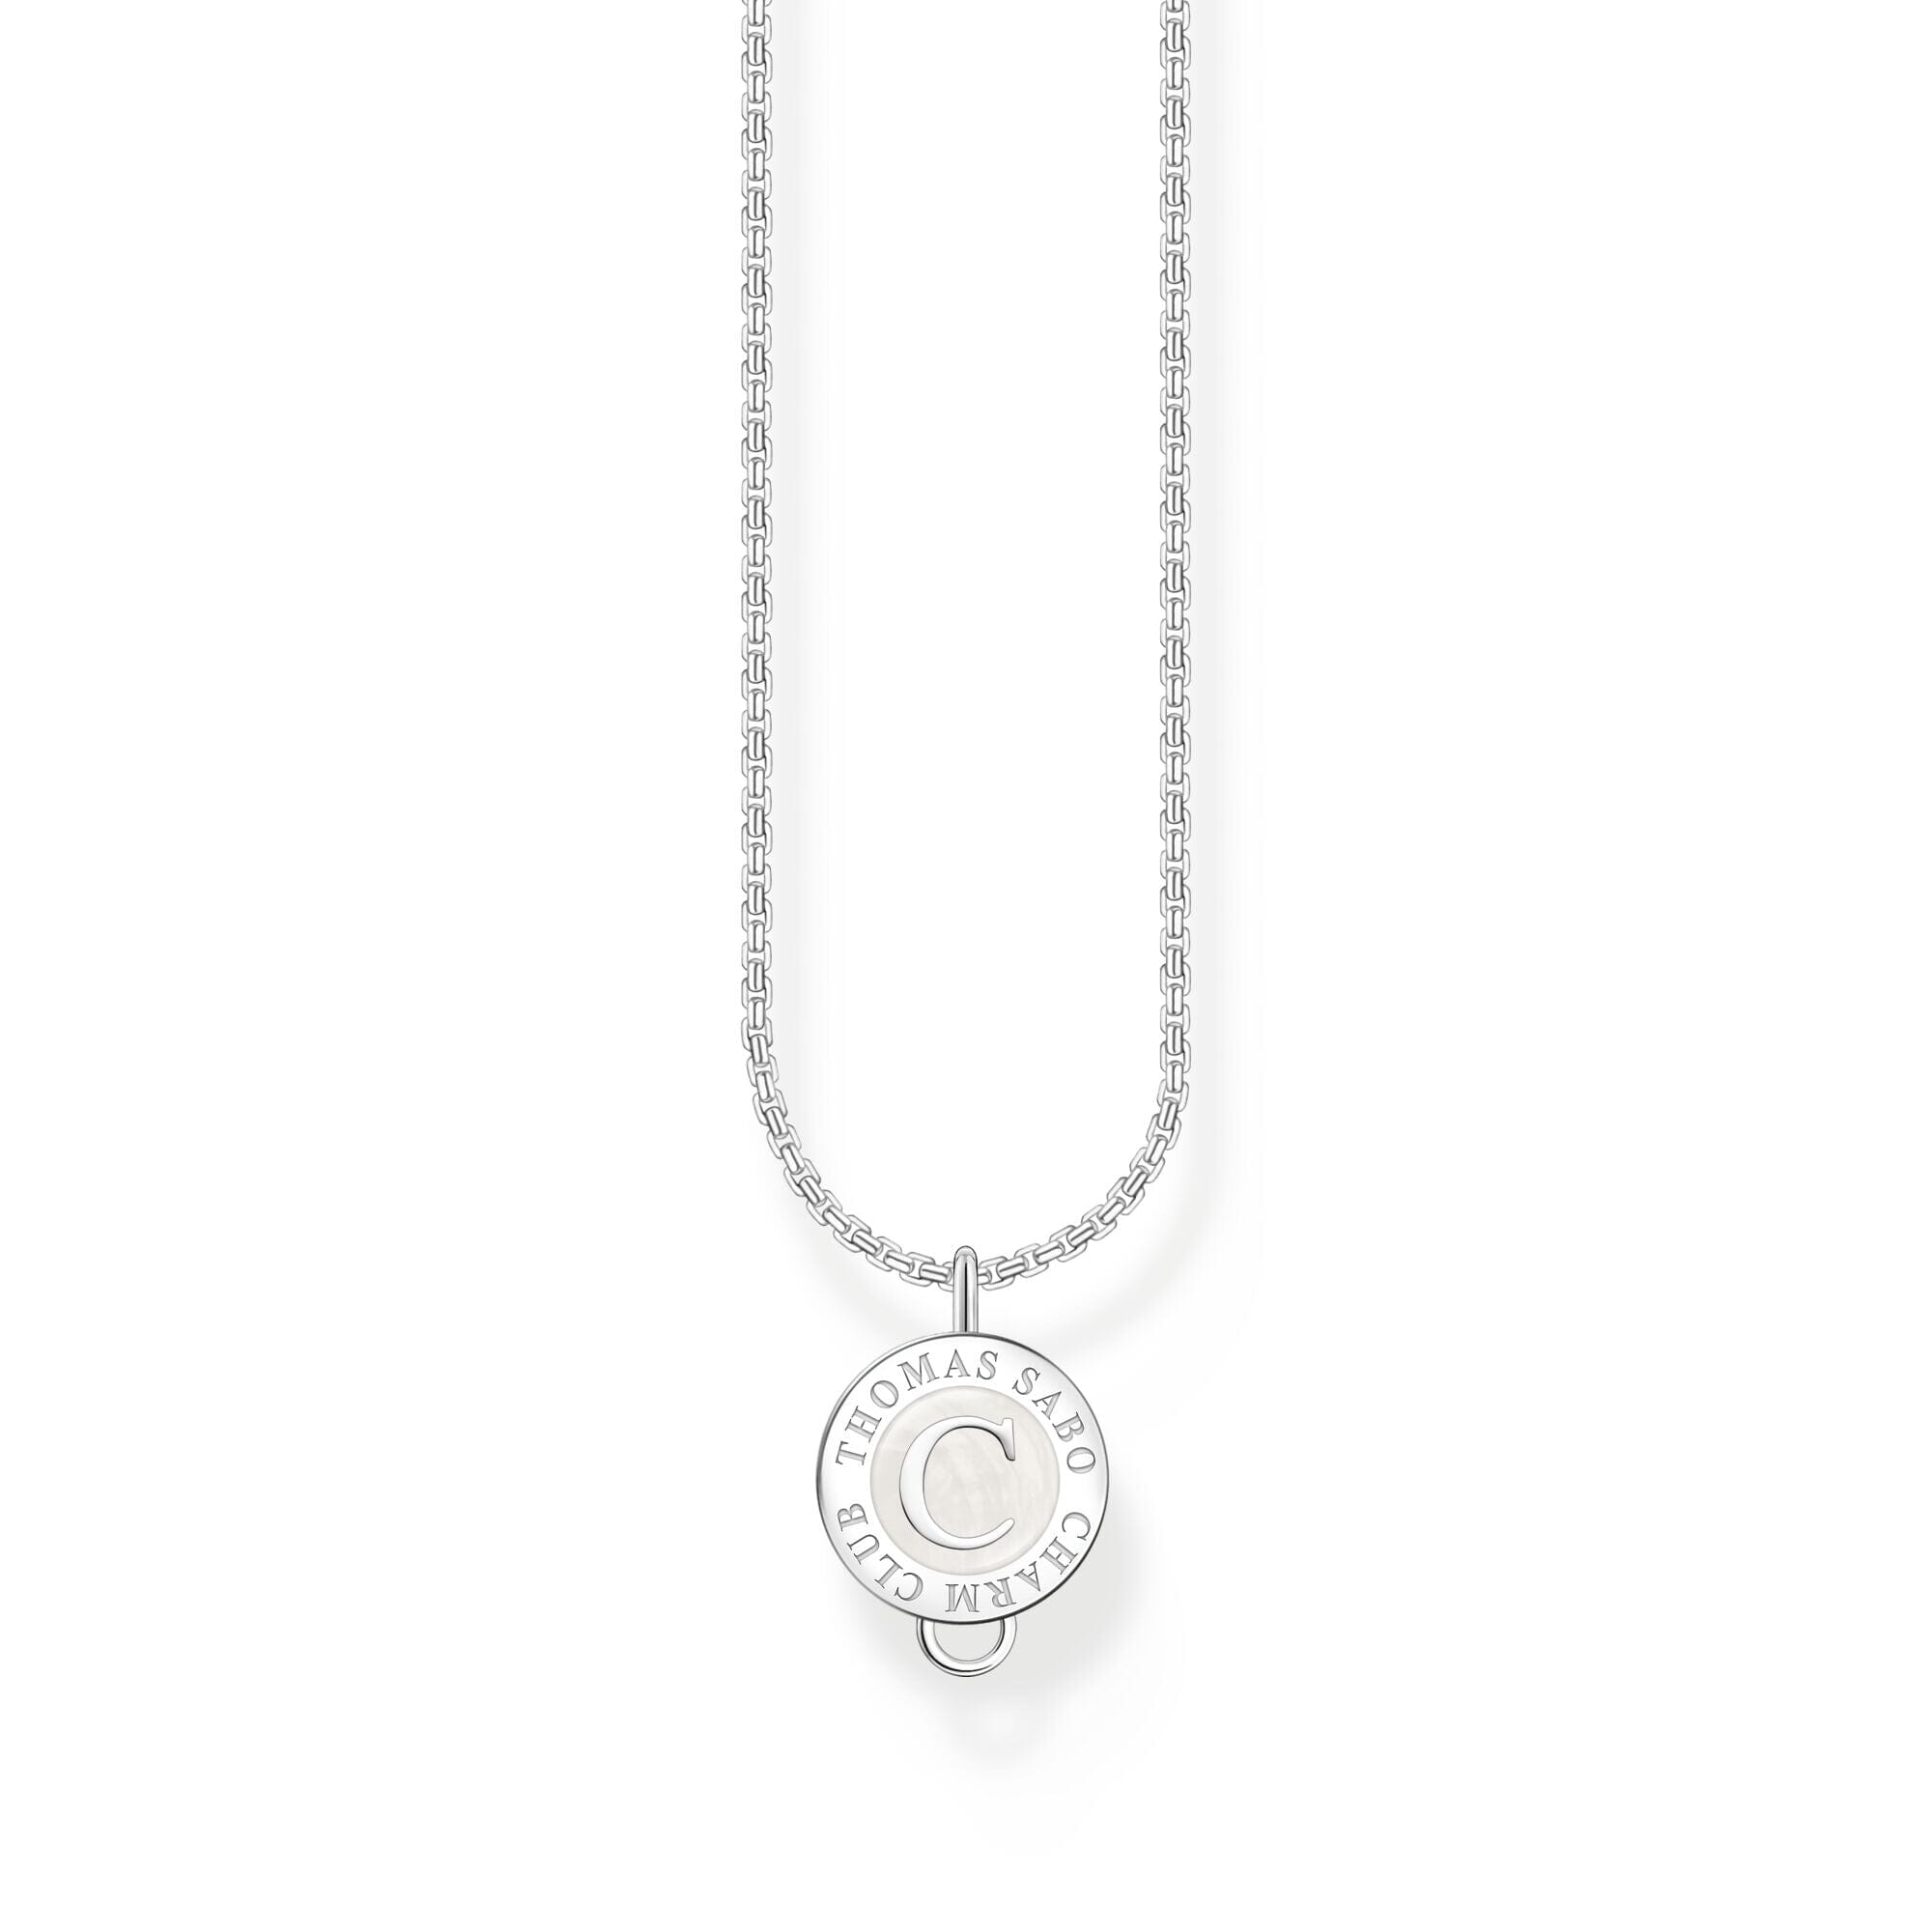 THOMAS SABO Charm Necklaces with Cold Enamel Silver Necklaces THOMAS SABO Charmista 